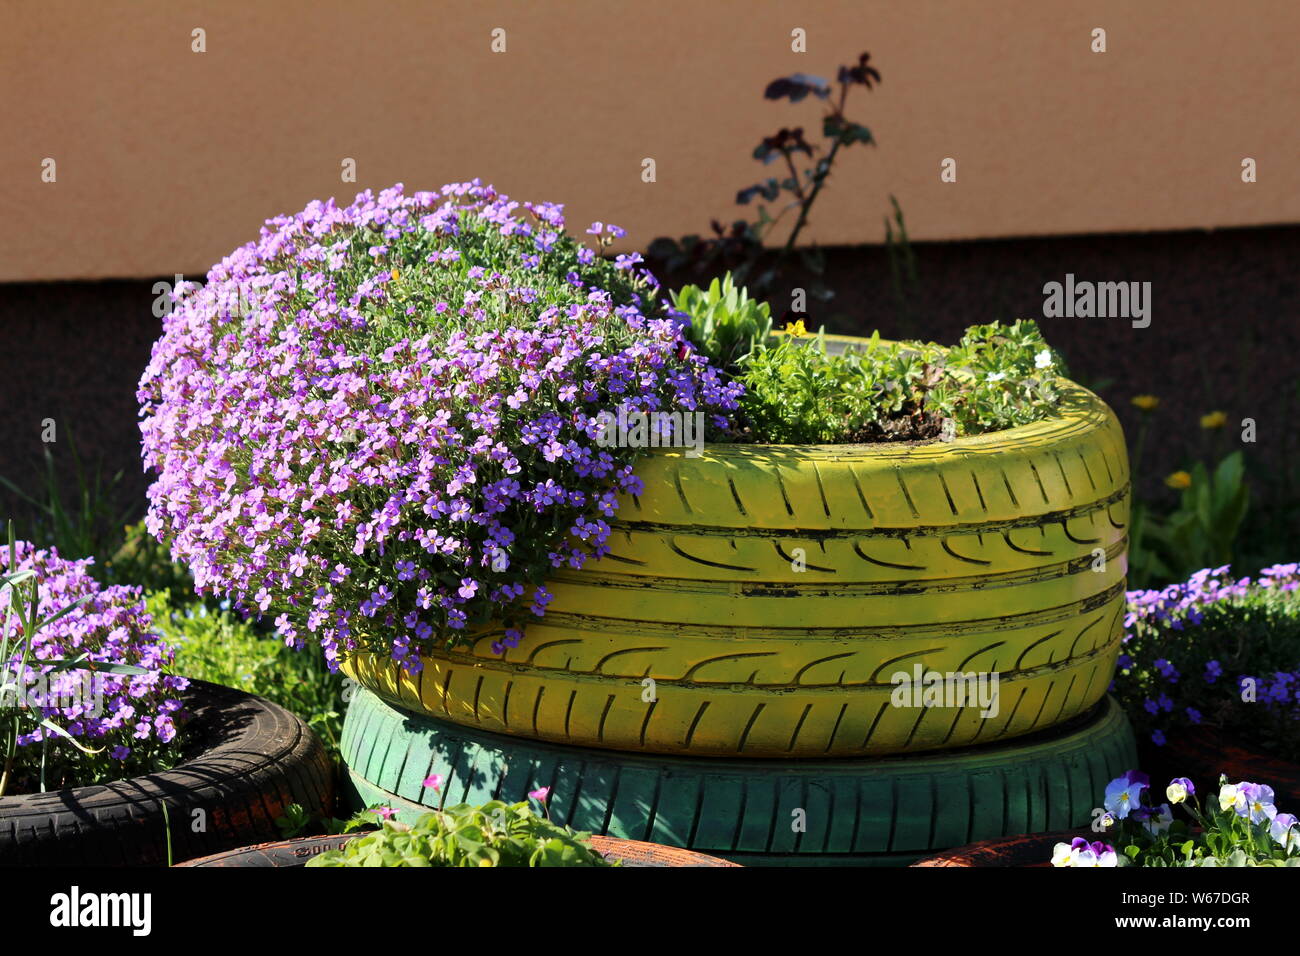 Creeping phlox or Phlox subulata or Moss phlox or Moss pink or Mountain phlox evergreen perennial flowering plant planted in colorful old tyre Stock Photo